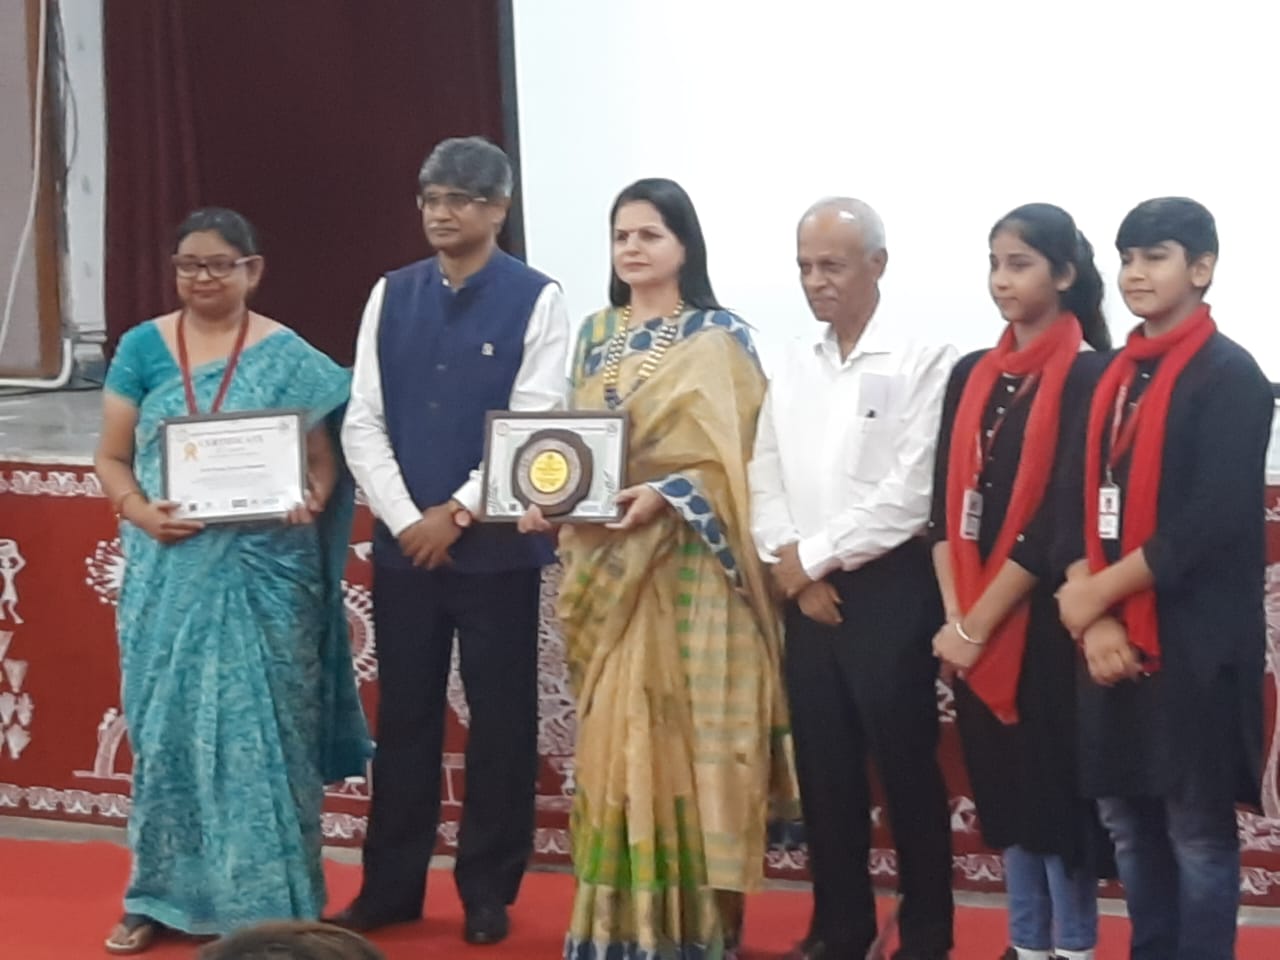 Felicitation of Principal Ma’am by Indian Centre for Plastics in the Environment